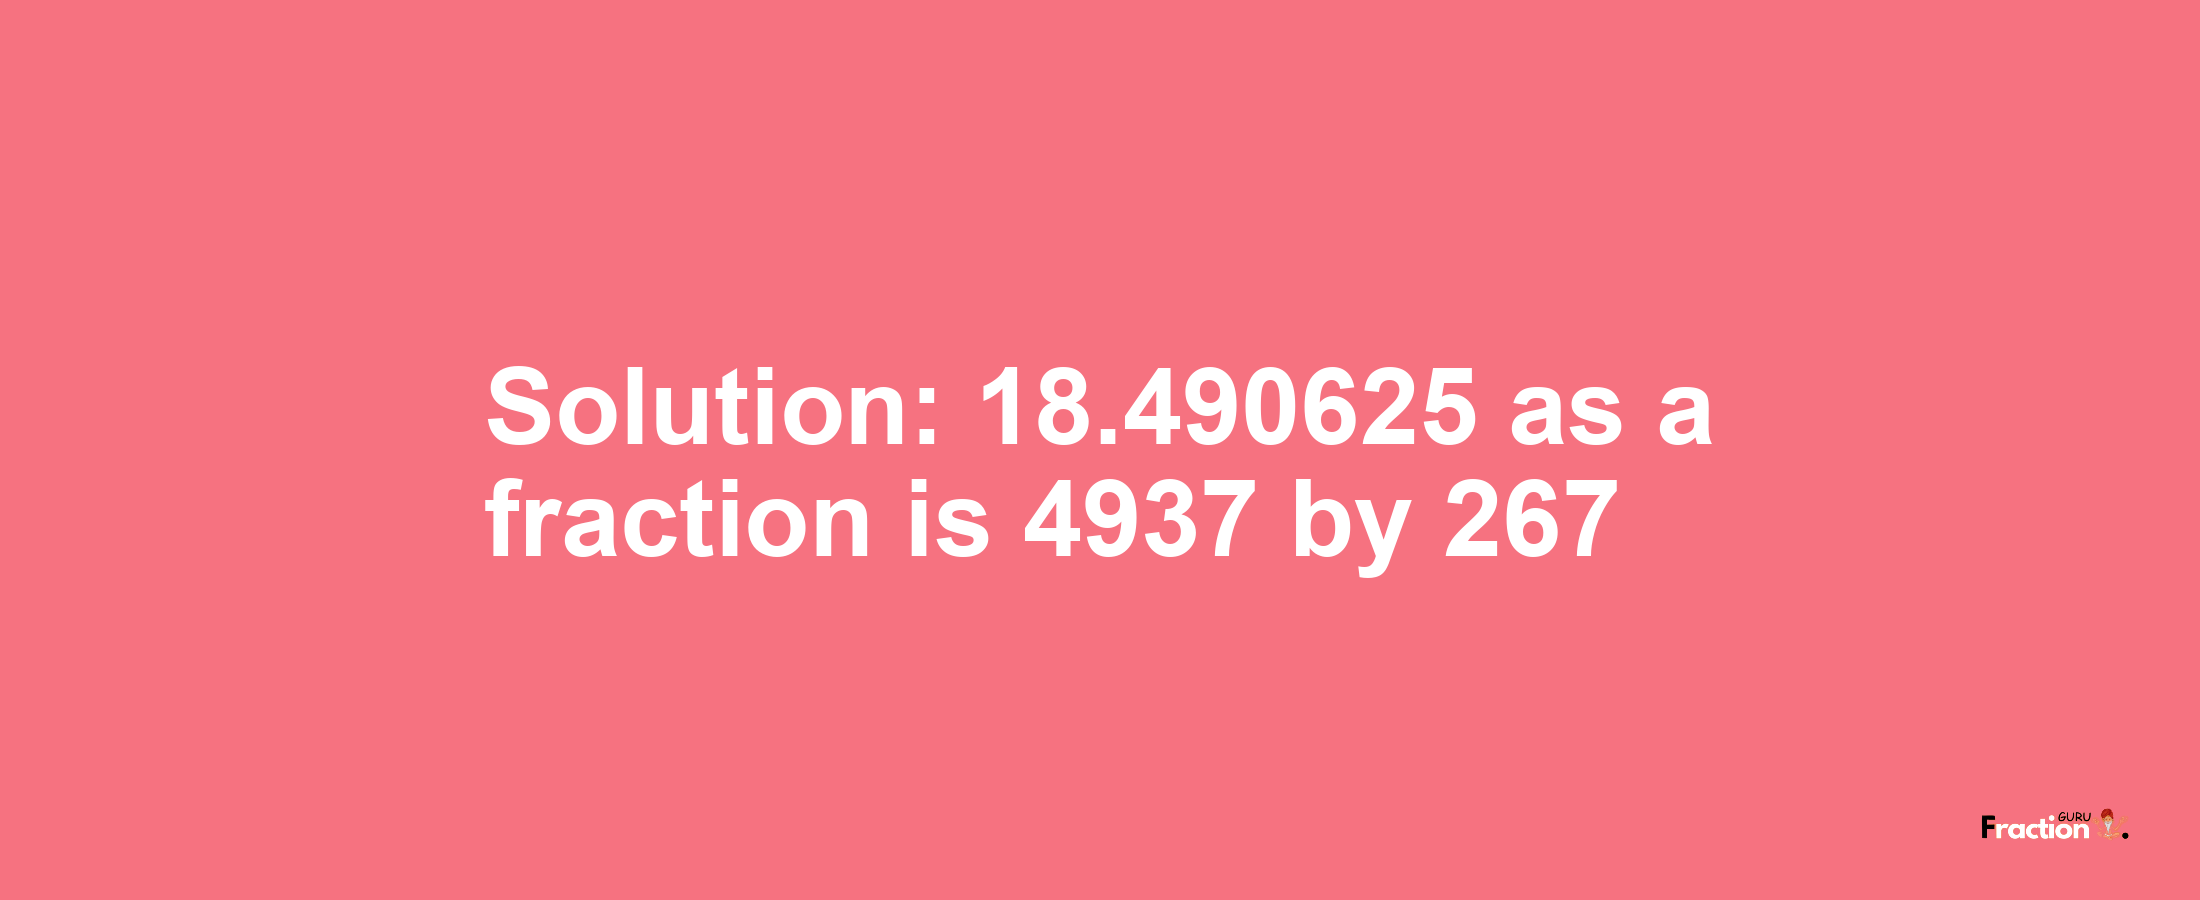 Solution:18.490625 as a fraction is 4937/267